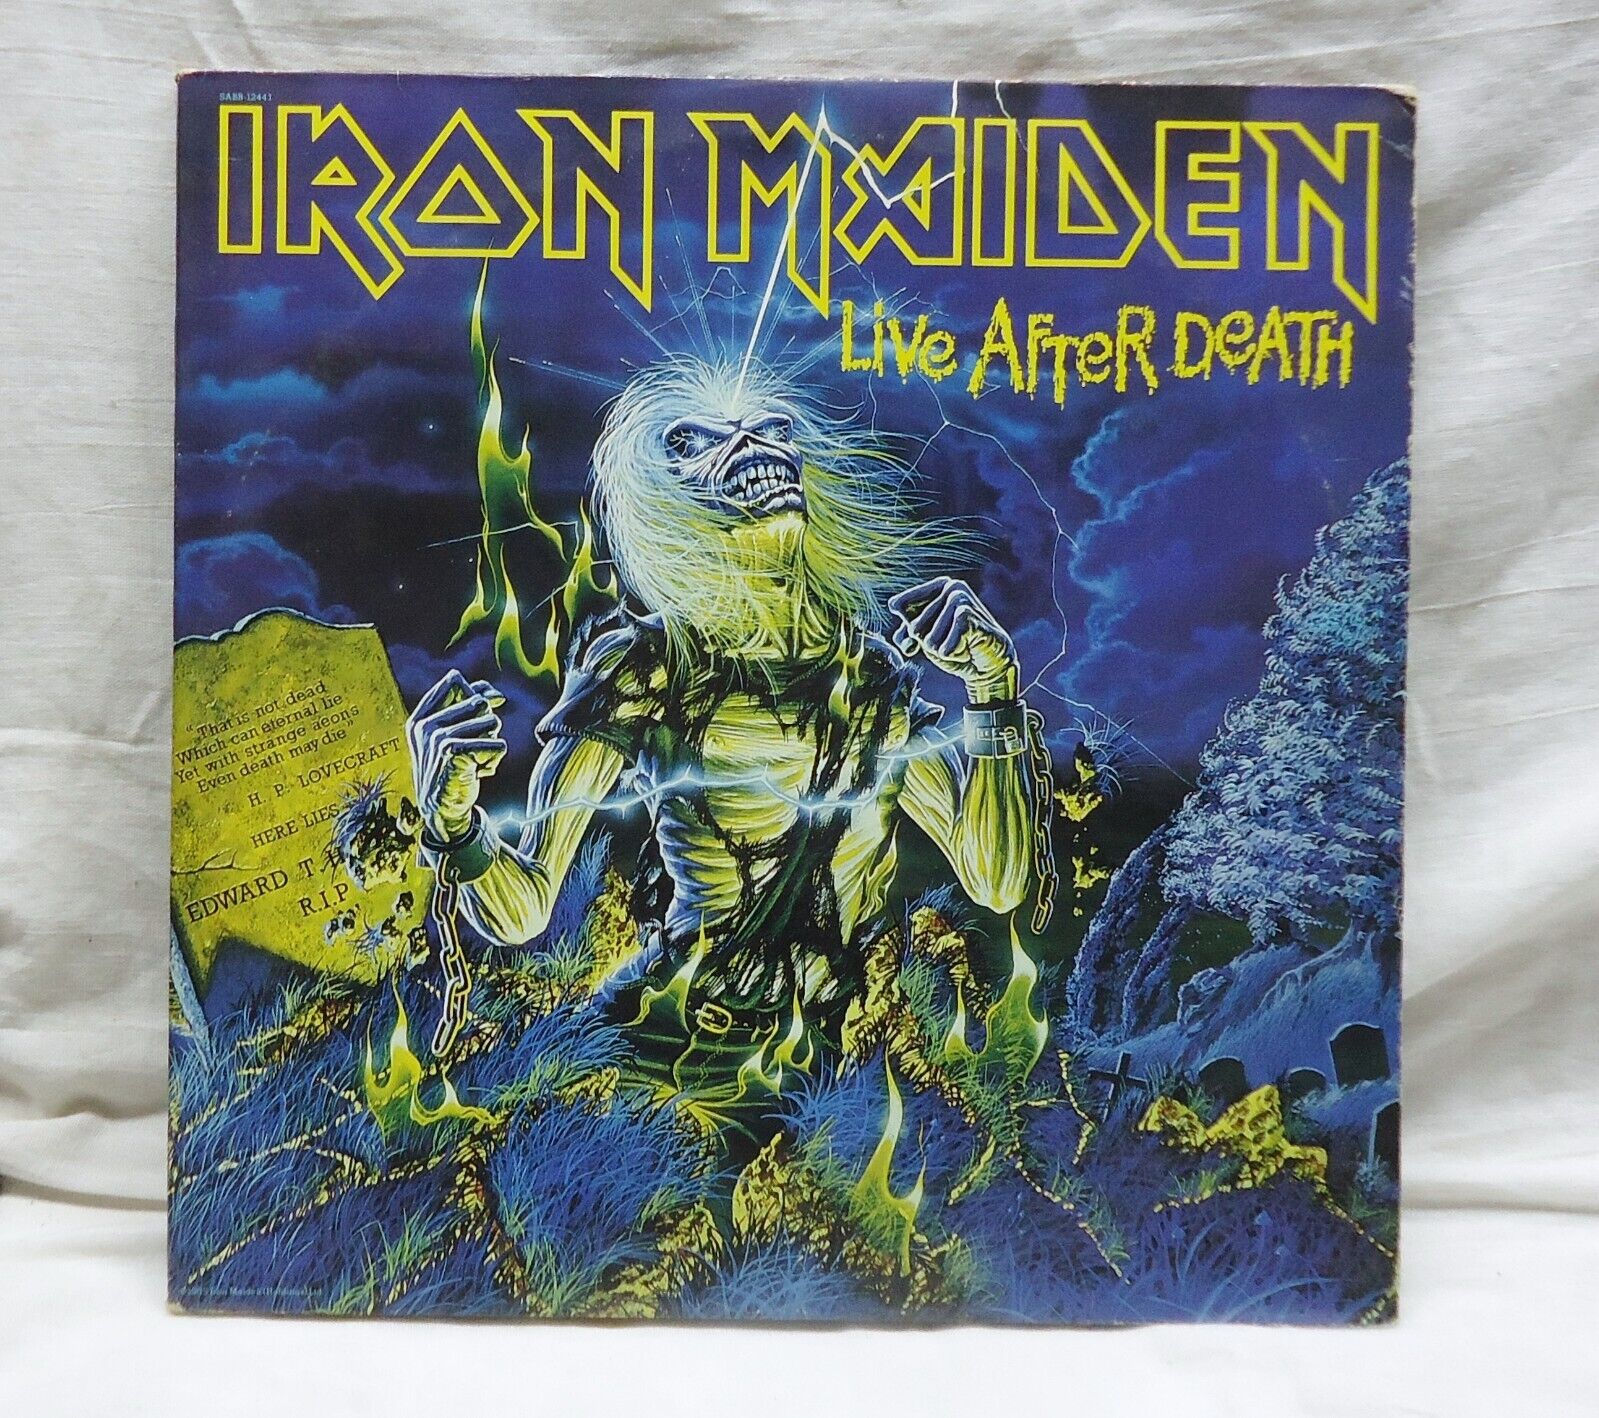 Vintage 1985 Iron Maiden Live After Death Lp With Inserts Missing One Record